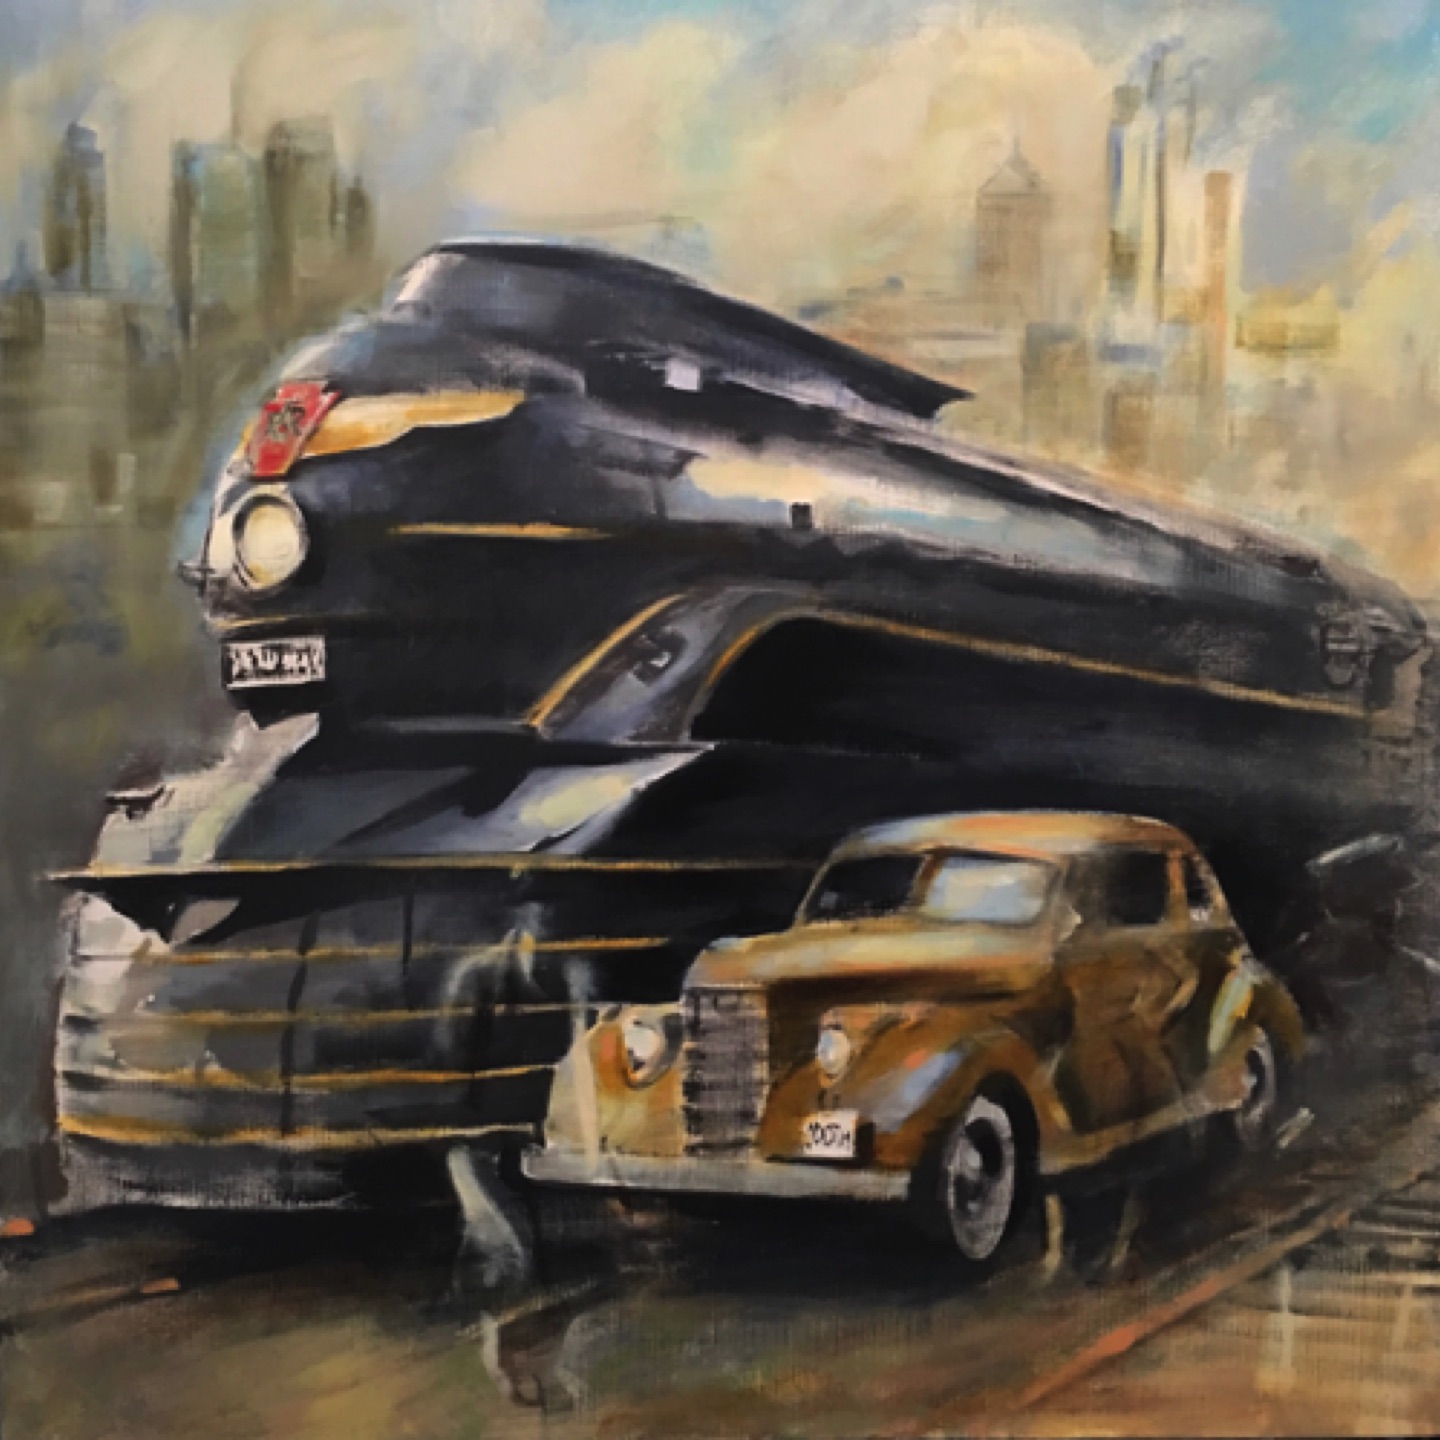 Gregg Chadwick
Between Worlds - Chicago
30"x30"oil on linen 2018
Private Collection, Los Angeles